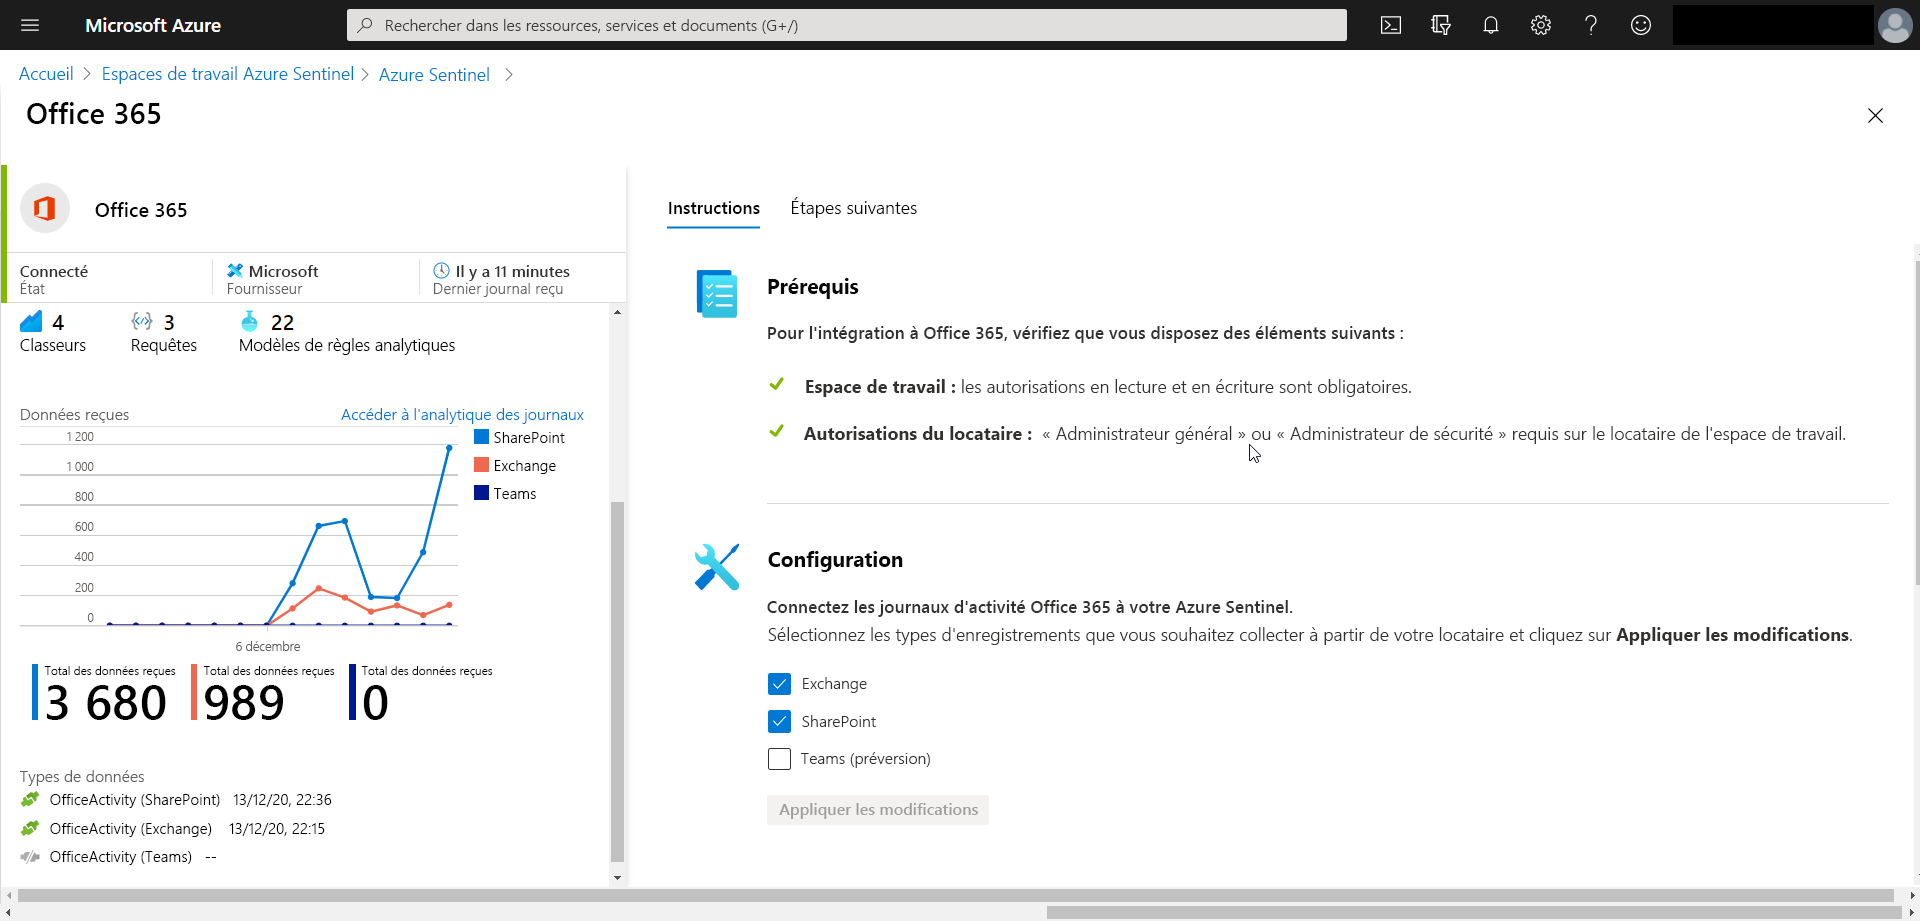 Screen shot of the Office 365 Connector page.